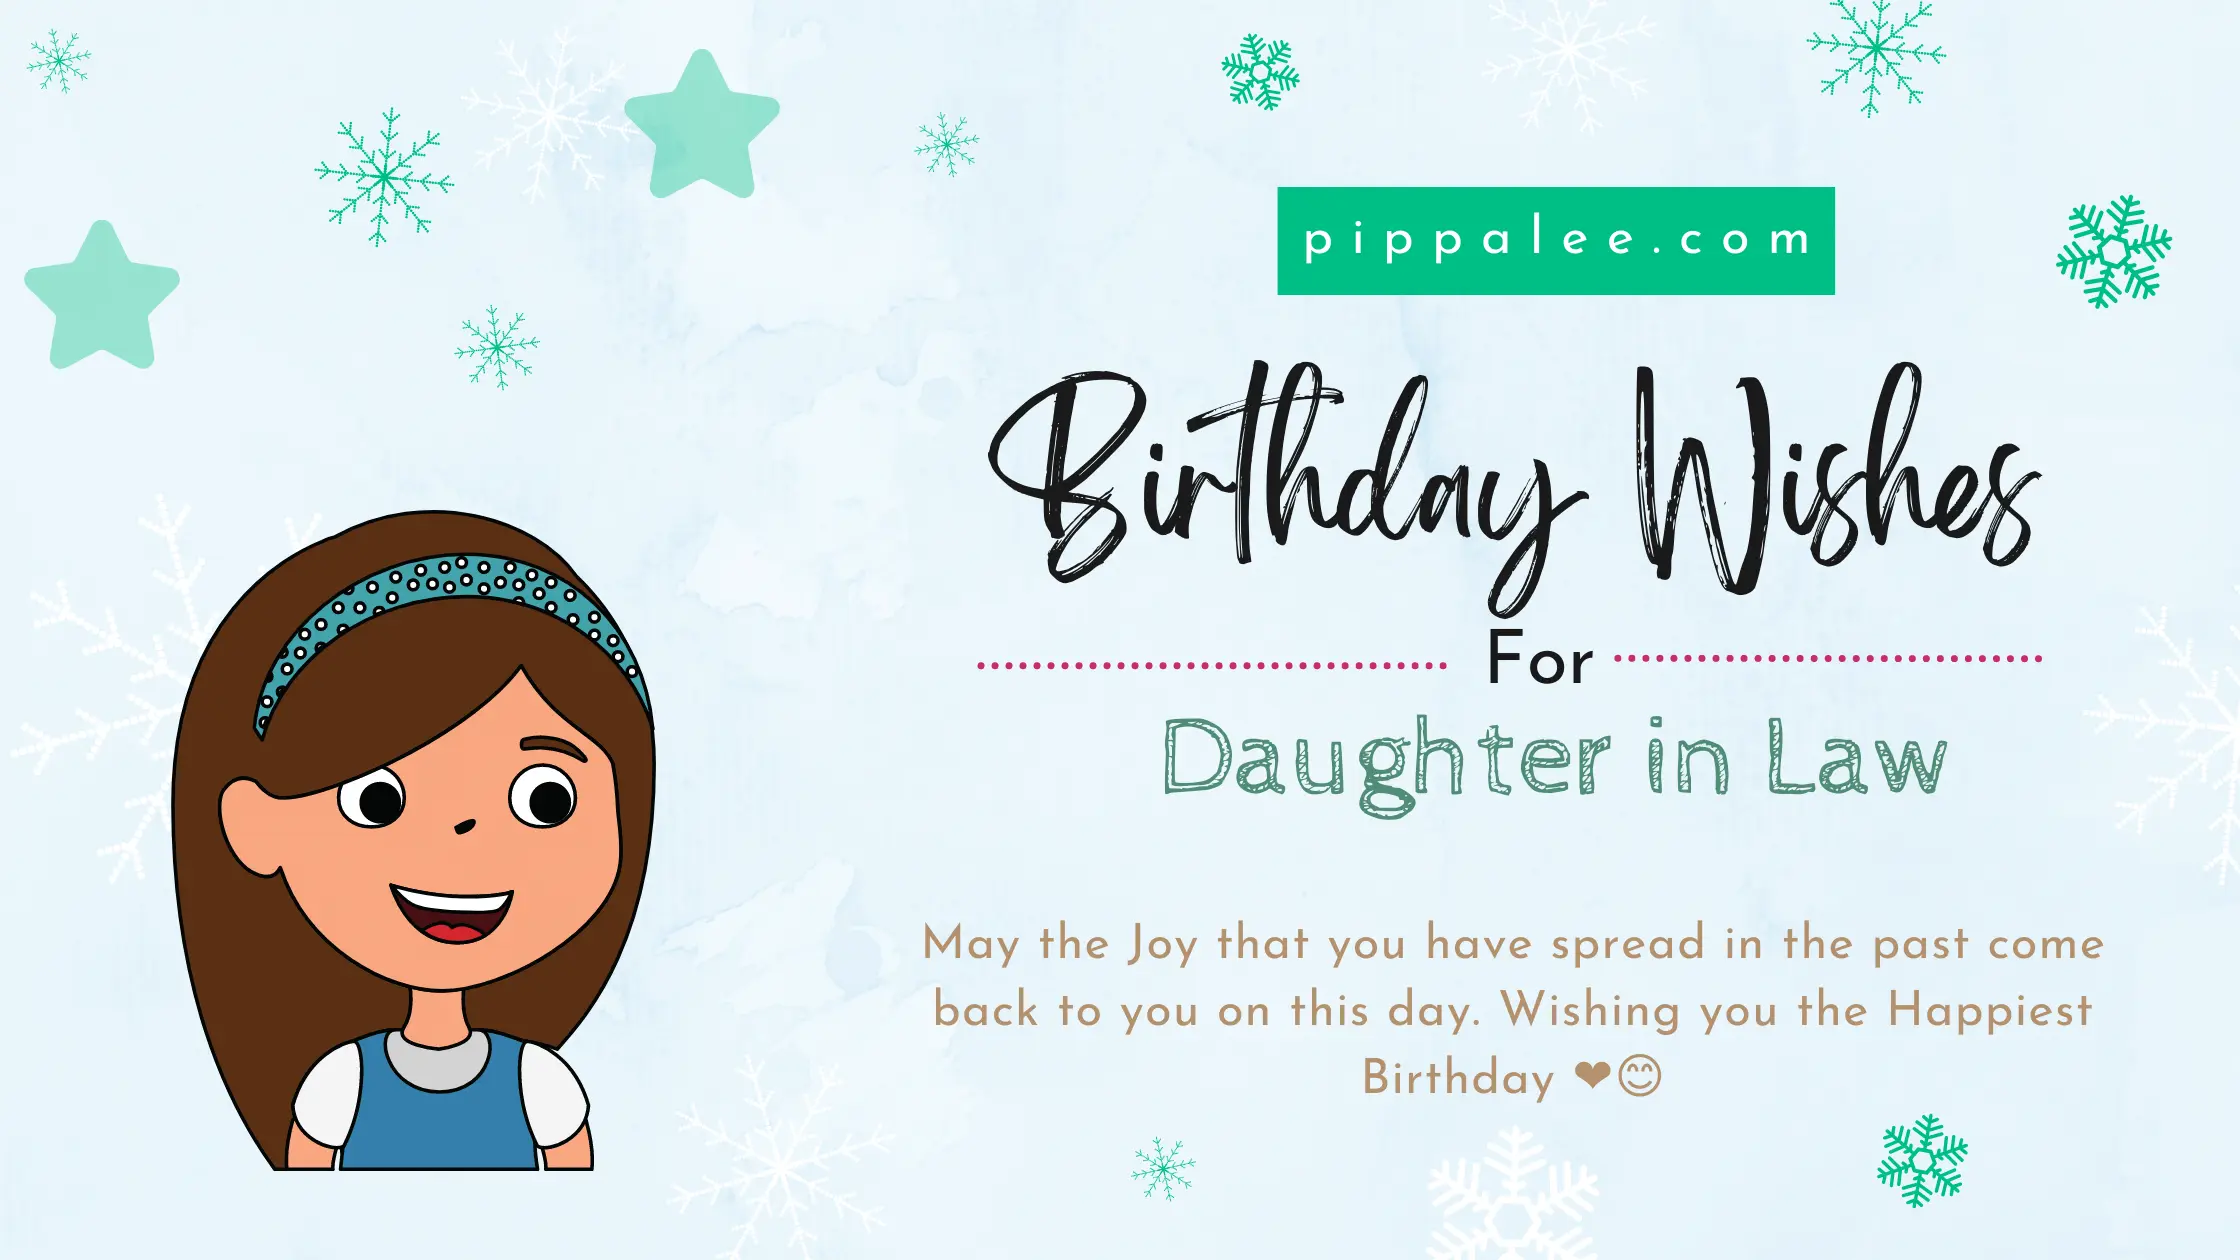 Birthday Wishes For Daughter in Law - Best Warm Wishes